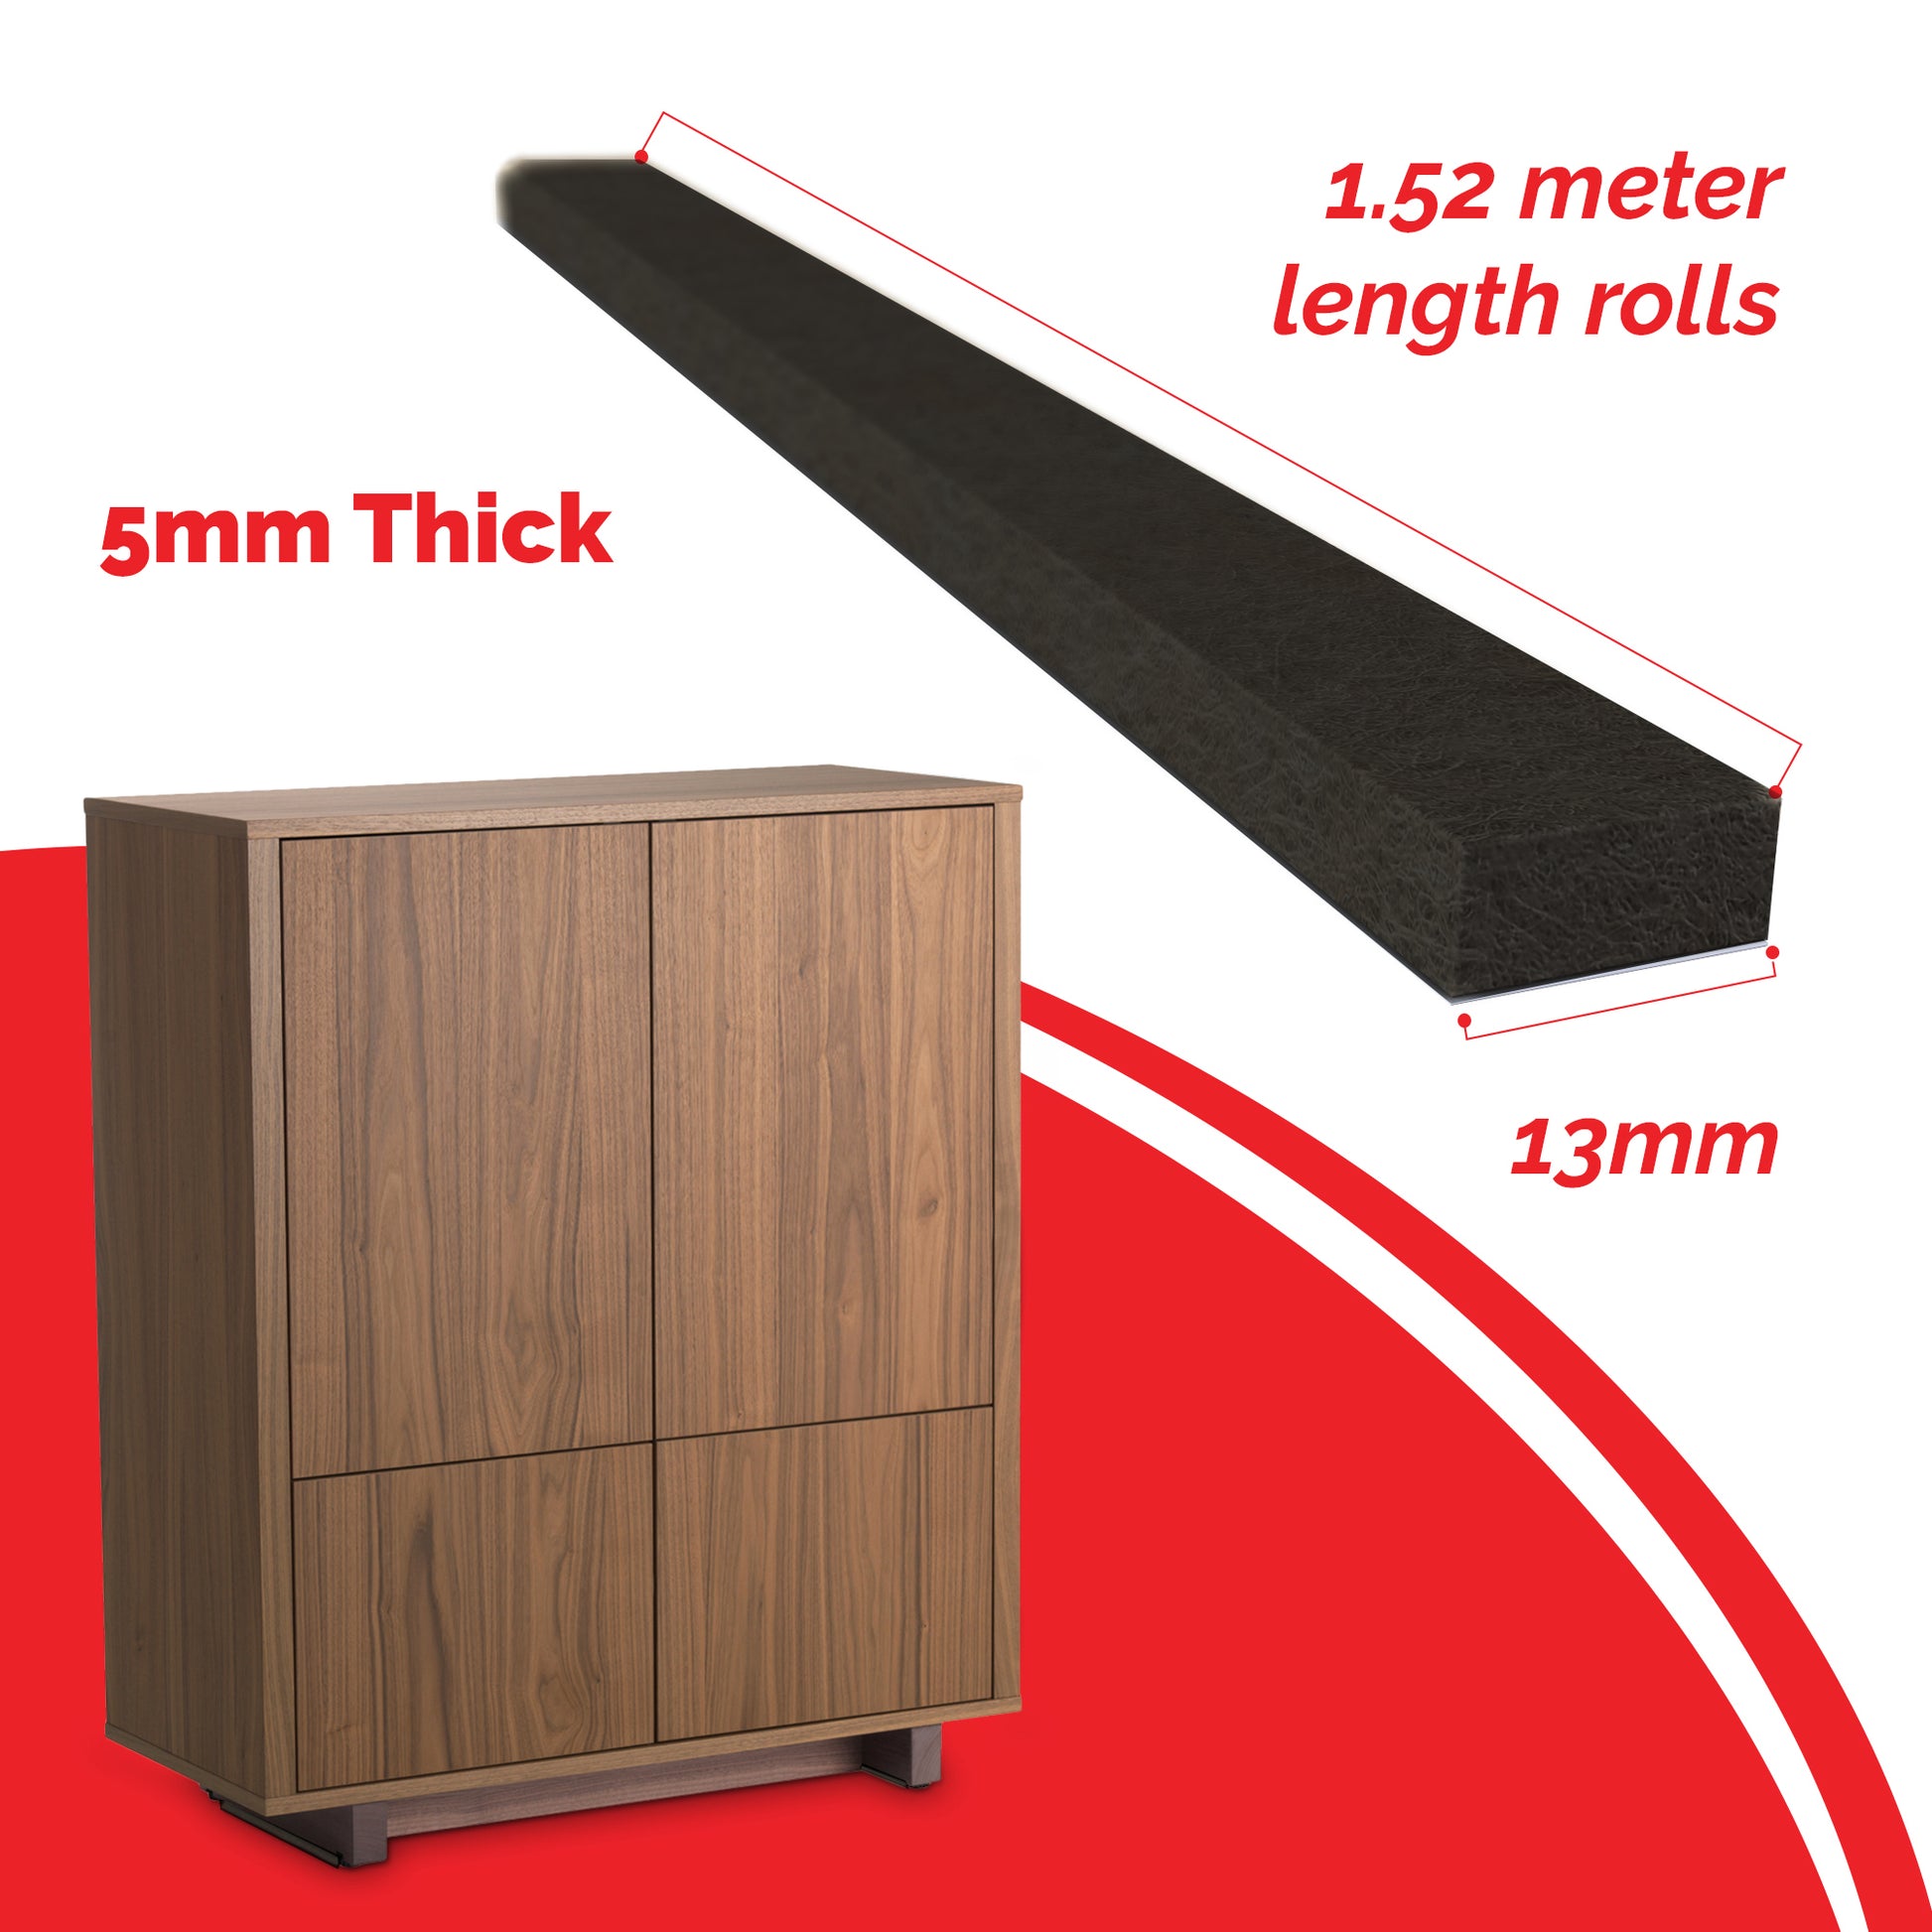 SIMALA furniture felt roll 1.52m x 13mm x 5mm. Protects floor standing furniture from scratches.